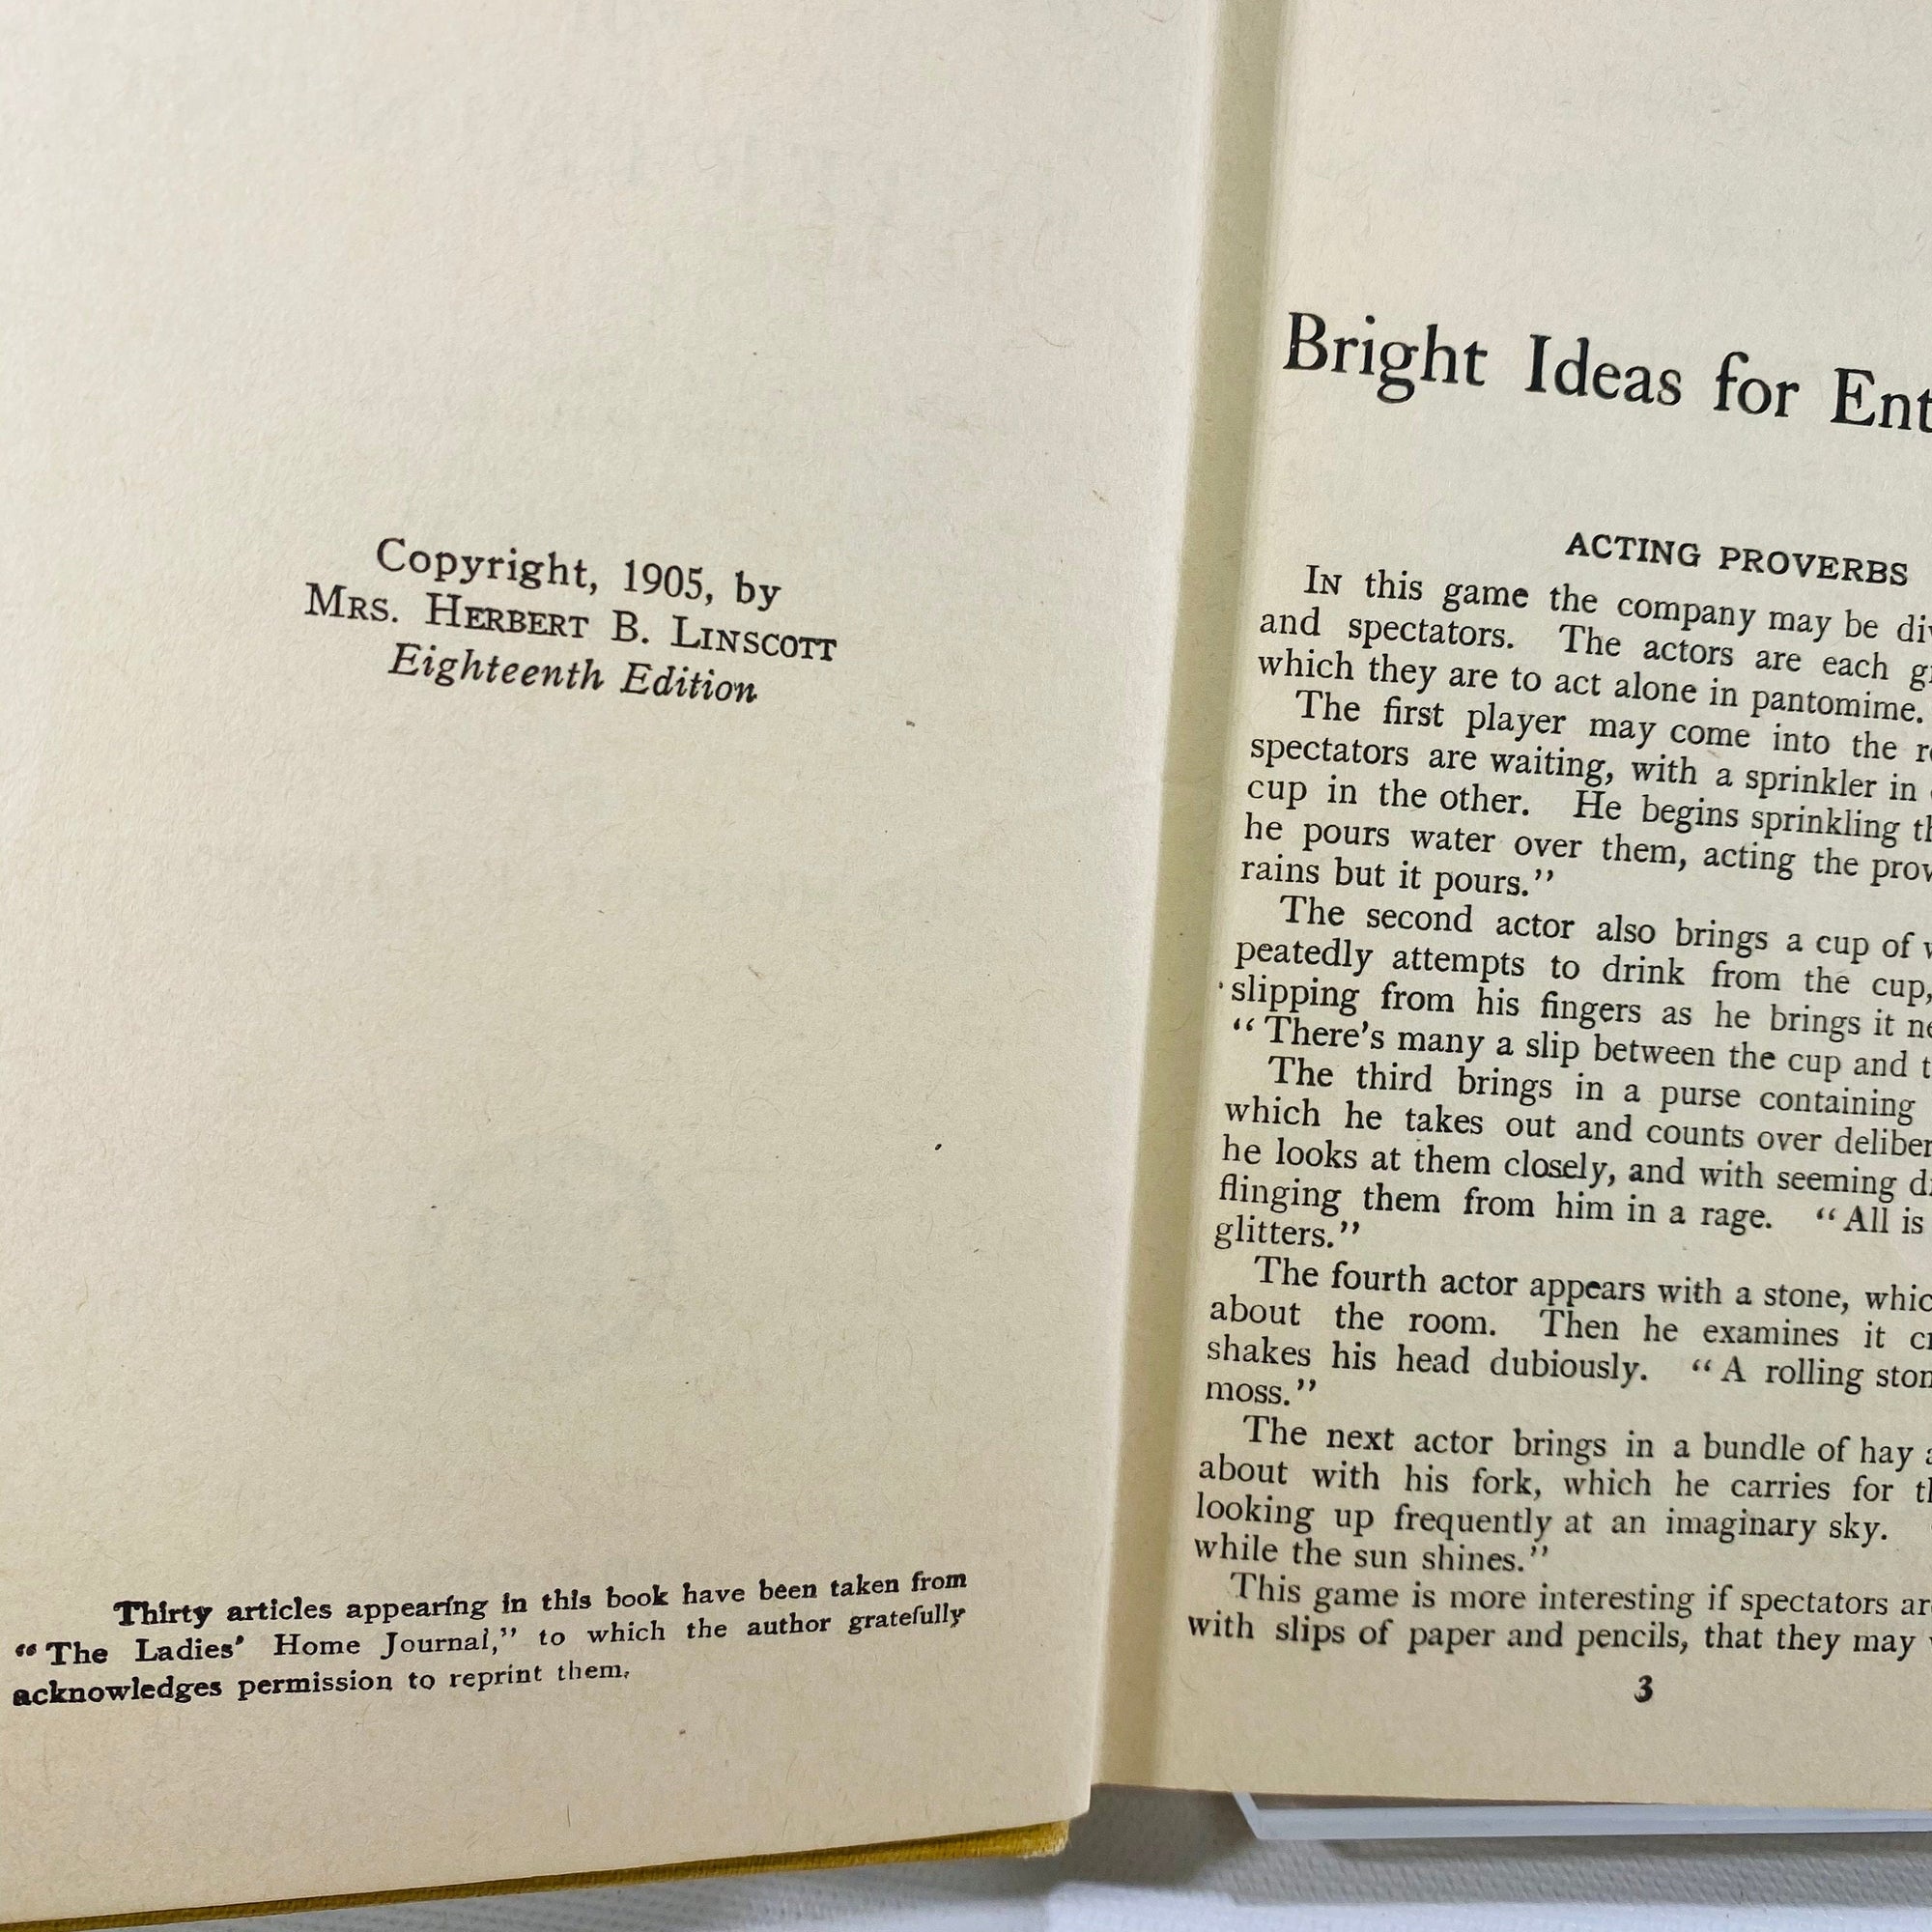 Bright Ideas for Entertaining by Mrs. Herbert Linscott 1905 George W. Jacobs &Co